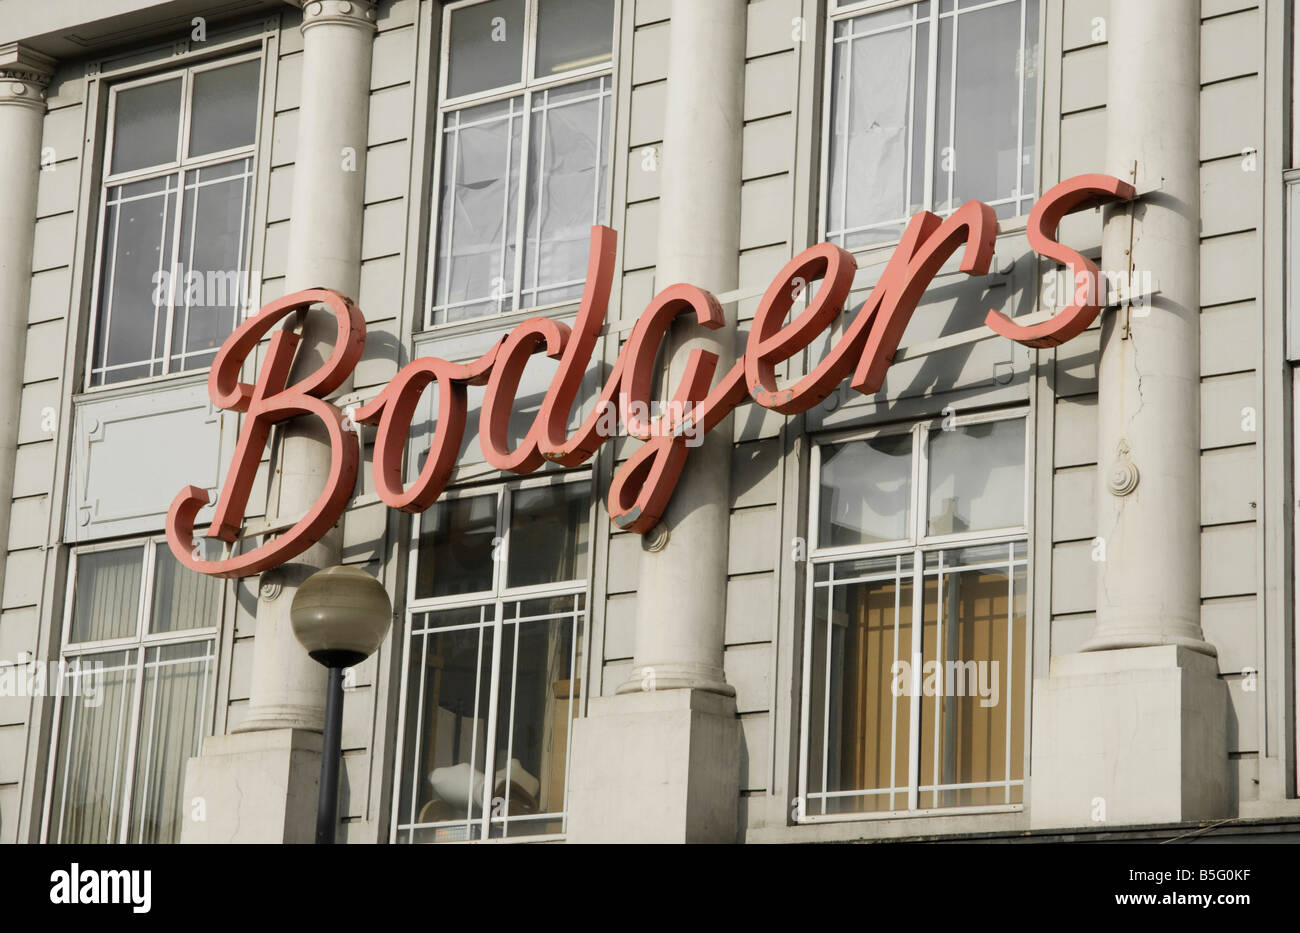 Bodgers logo on building in Ilford Stock Photo